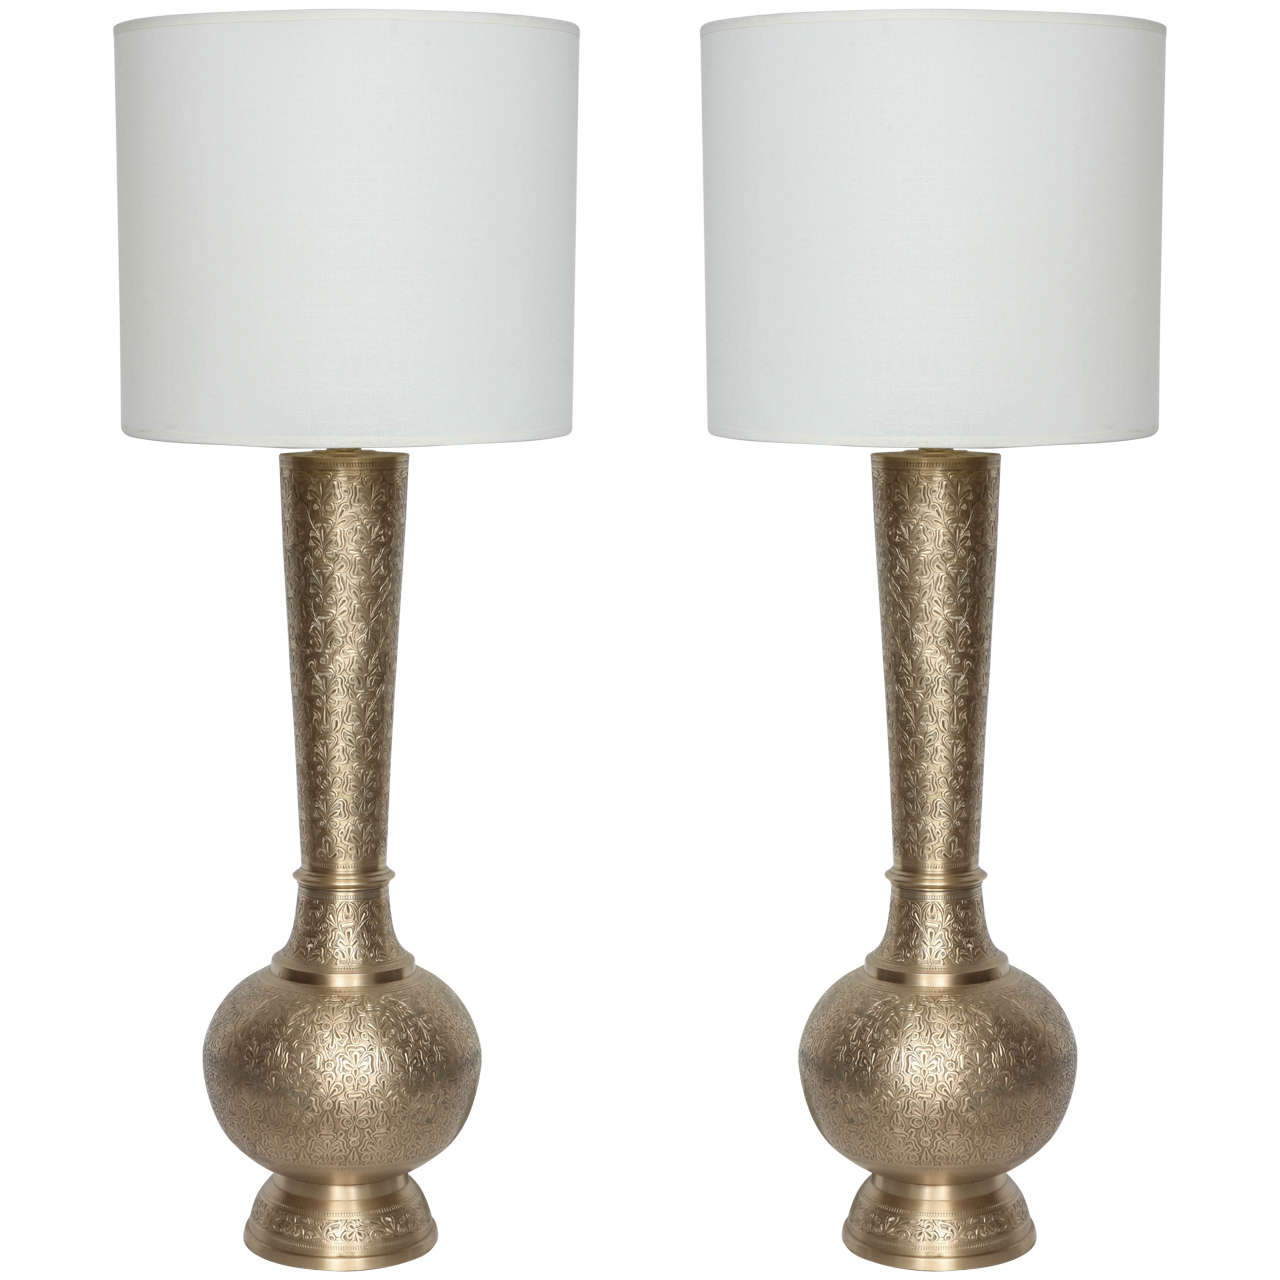 Pair of Engraved Brass Lamps